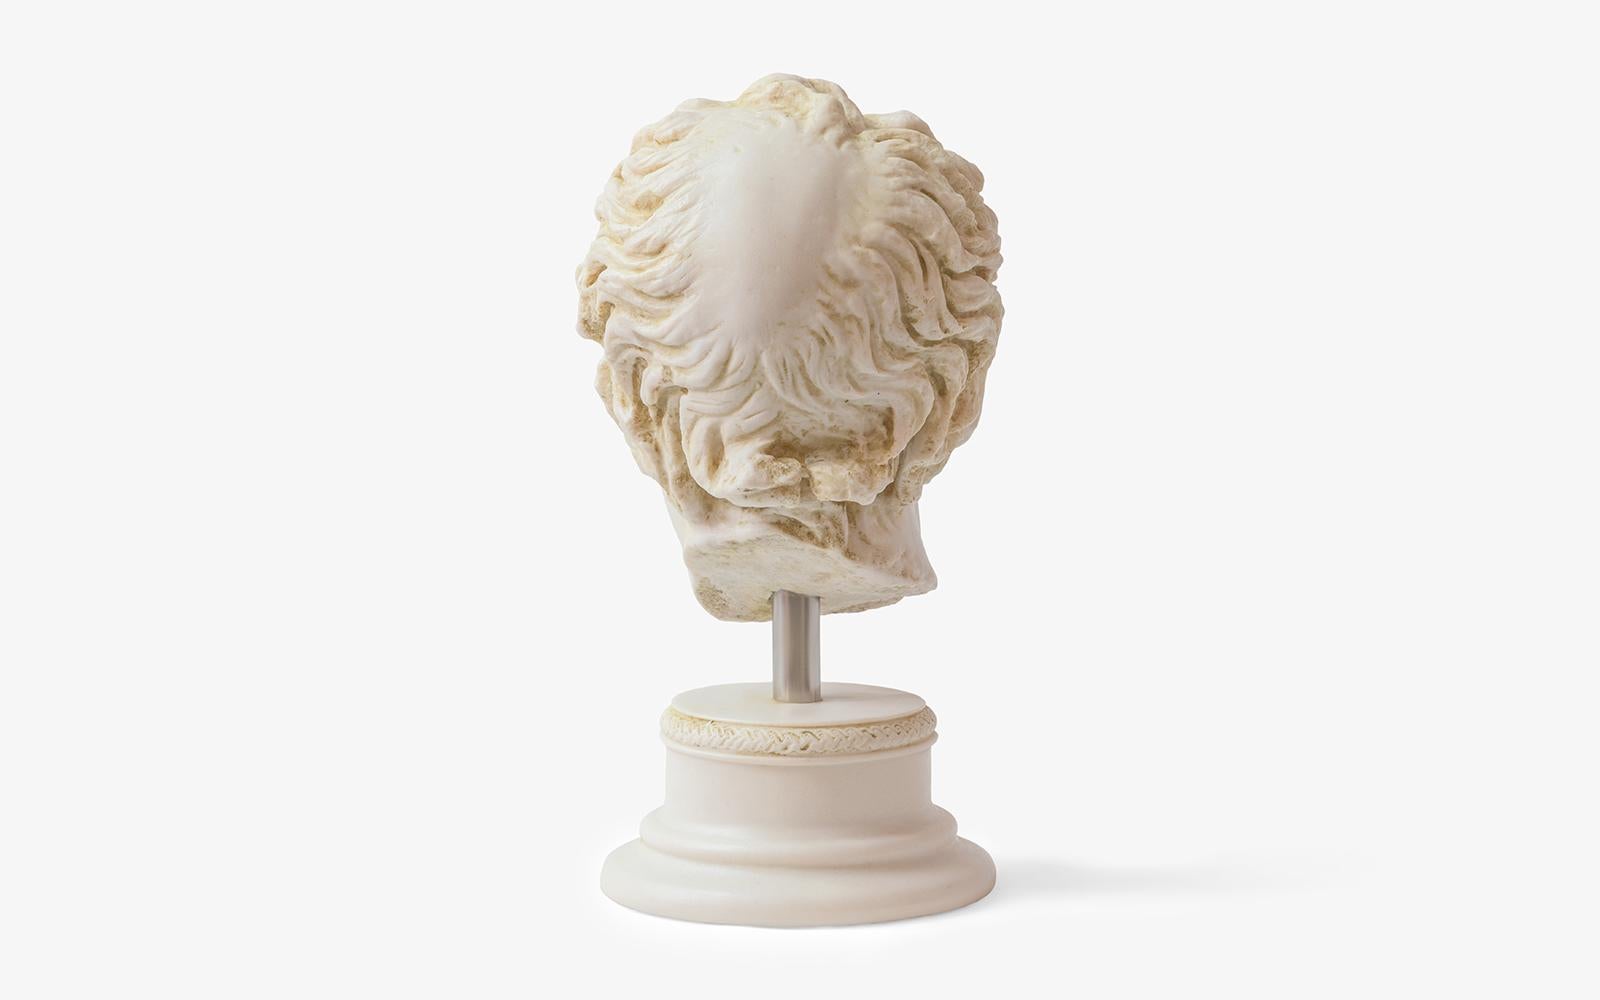 The Old Fisherman Bust serves as a timeless piece of decor, adding a touch of classical elegance to any setting. Whether displayed in a museum-like exhibit, an art lover's private collection, or as a centerpiece in your living space, this